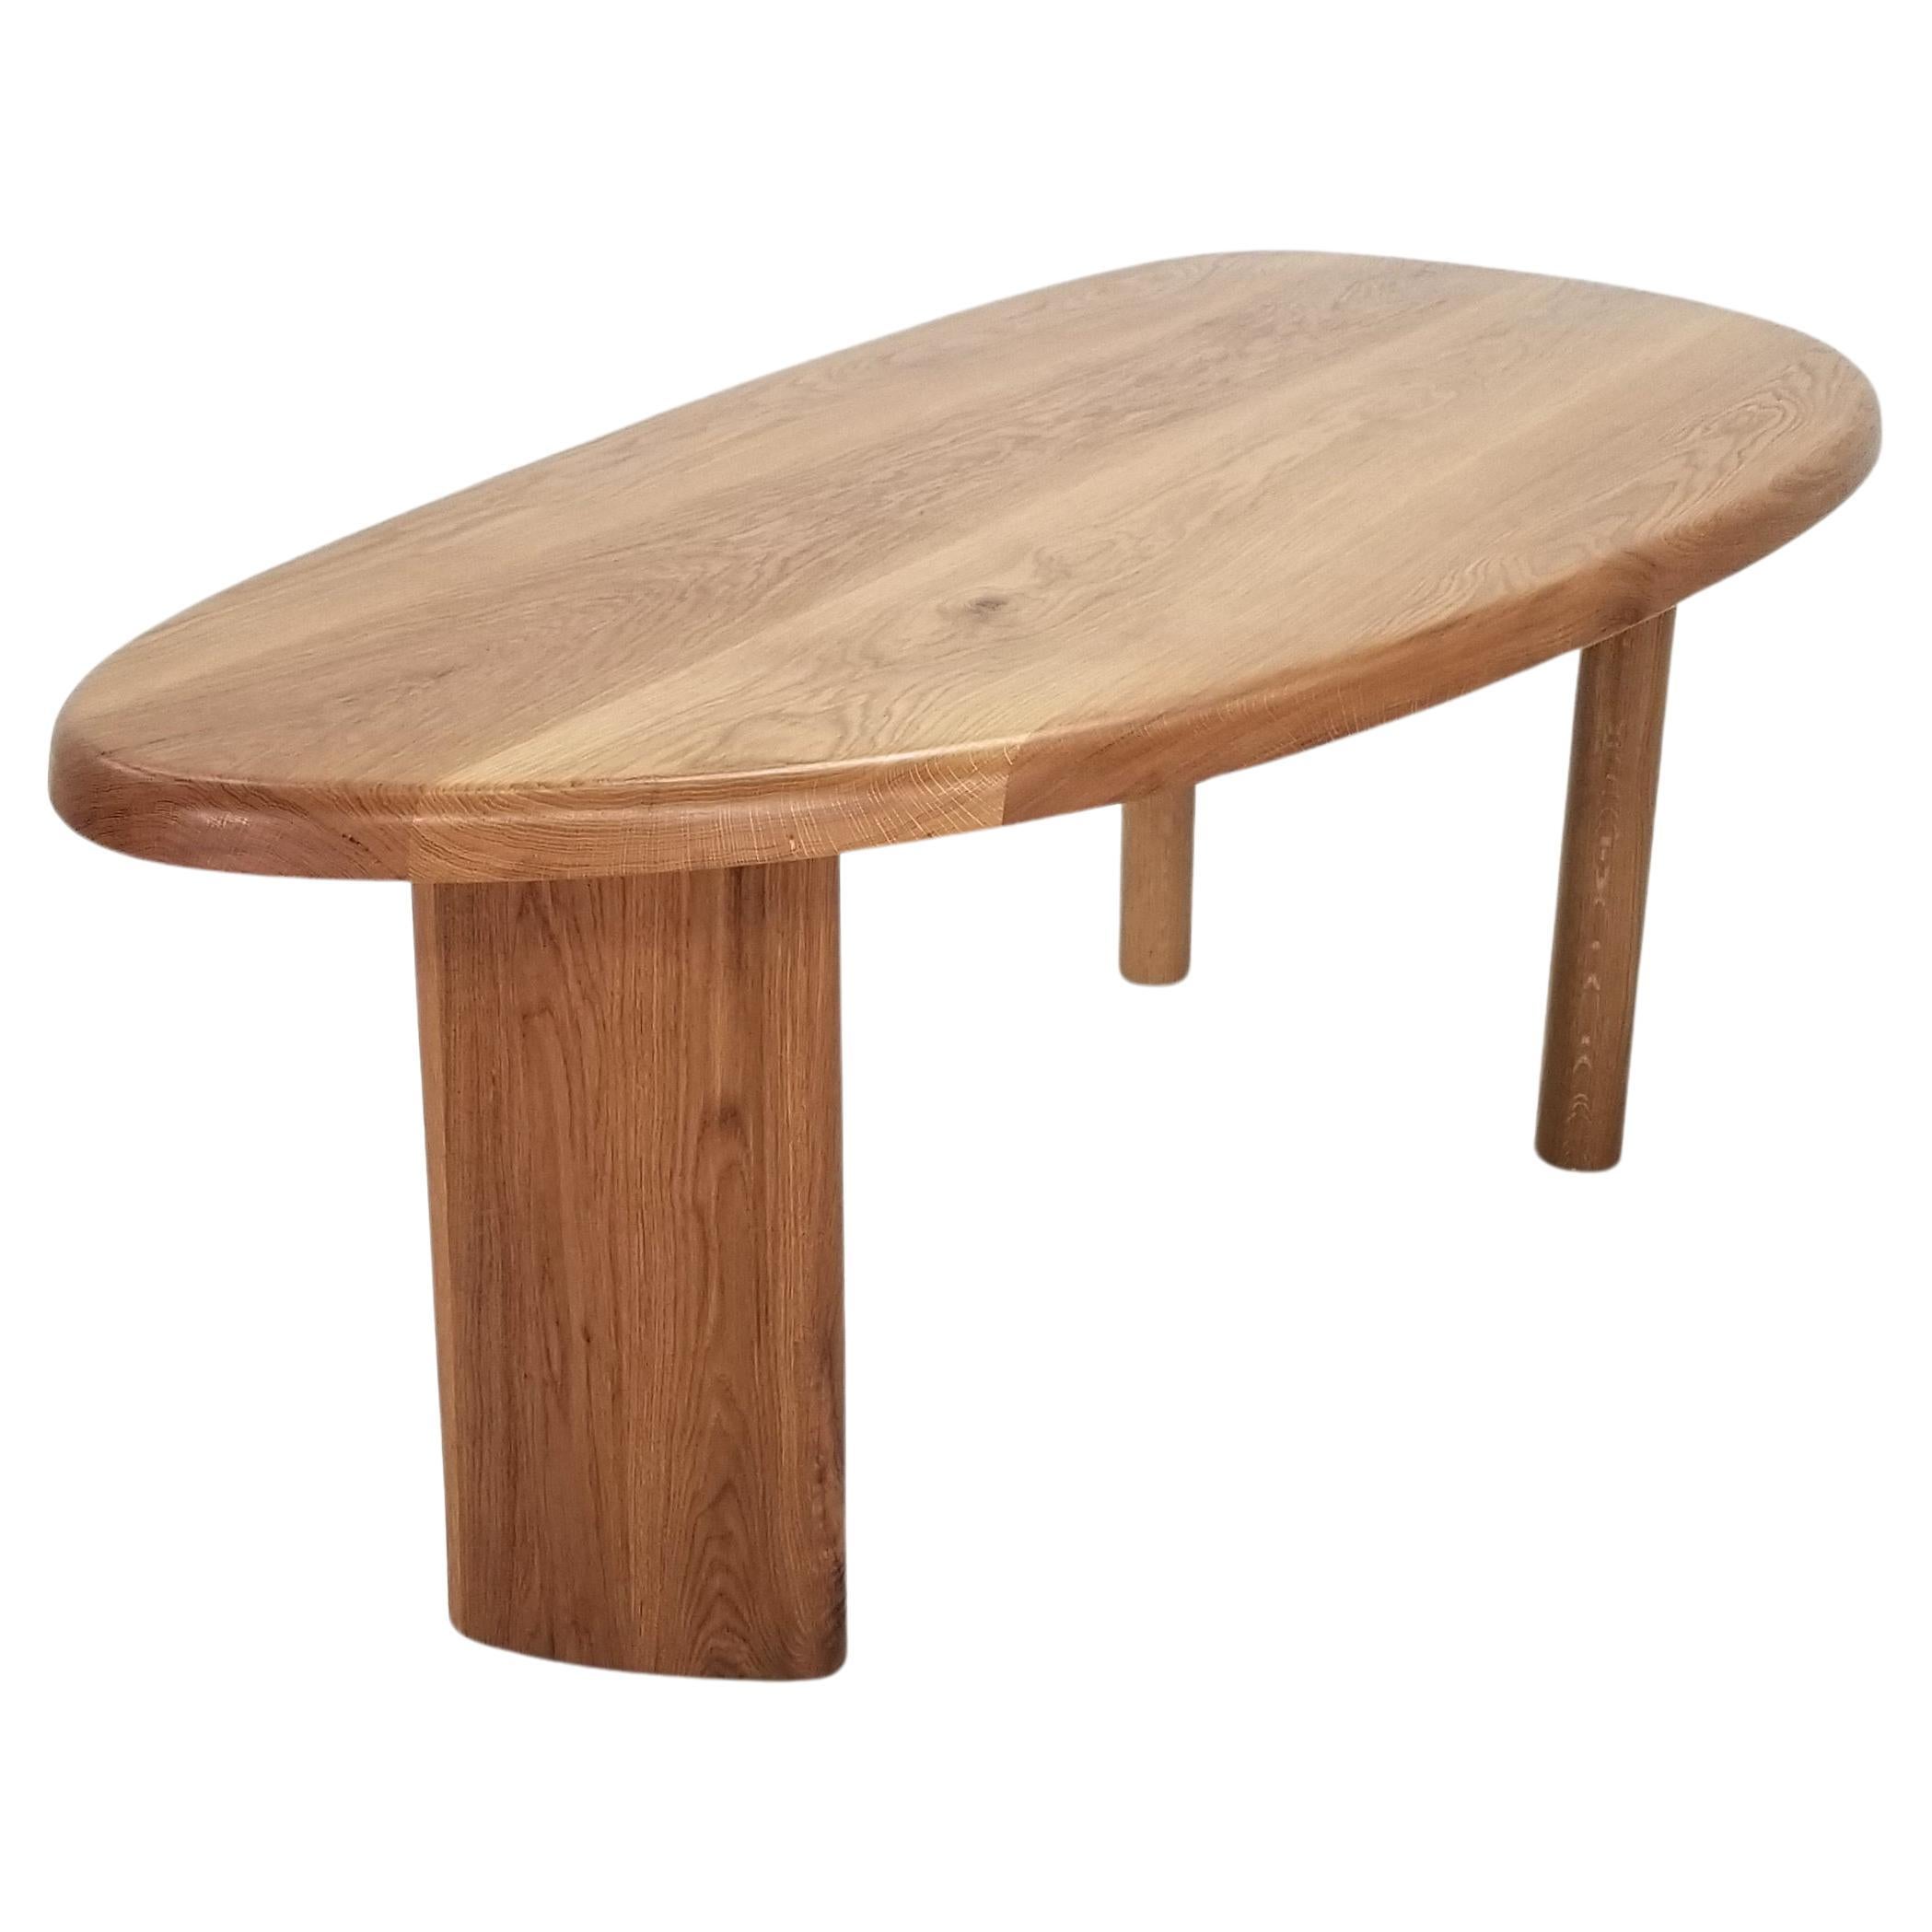 Free-Form White Oak Dining Table For Sale